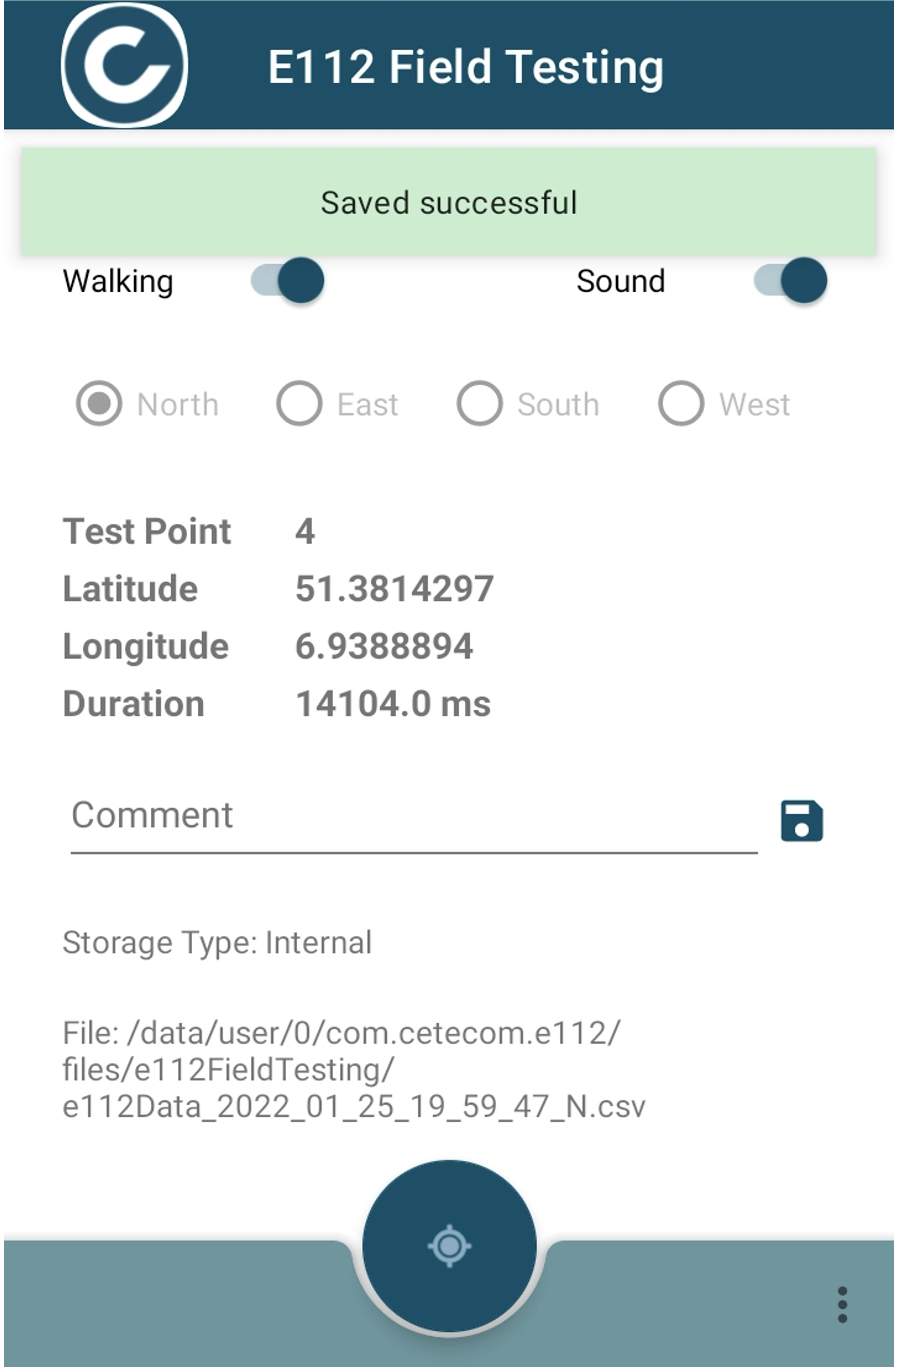 Screenshot from the cetecom advanced app for performing and controlling WLAN tests, which displays data